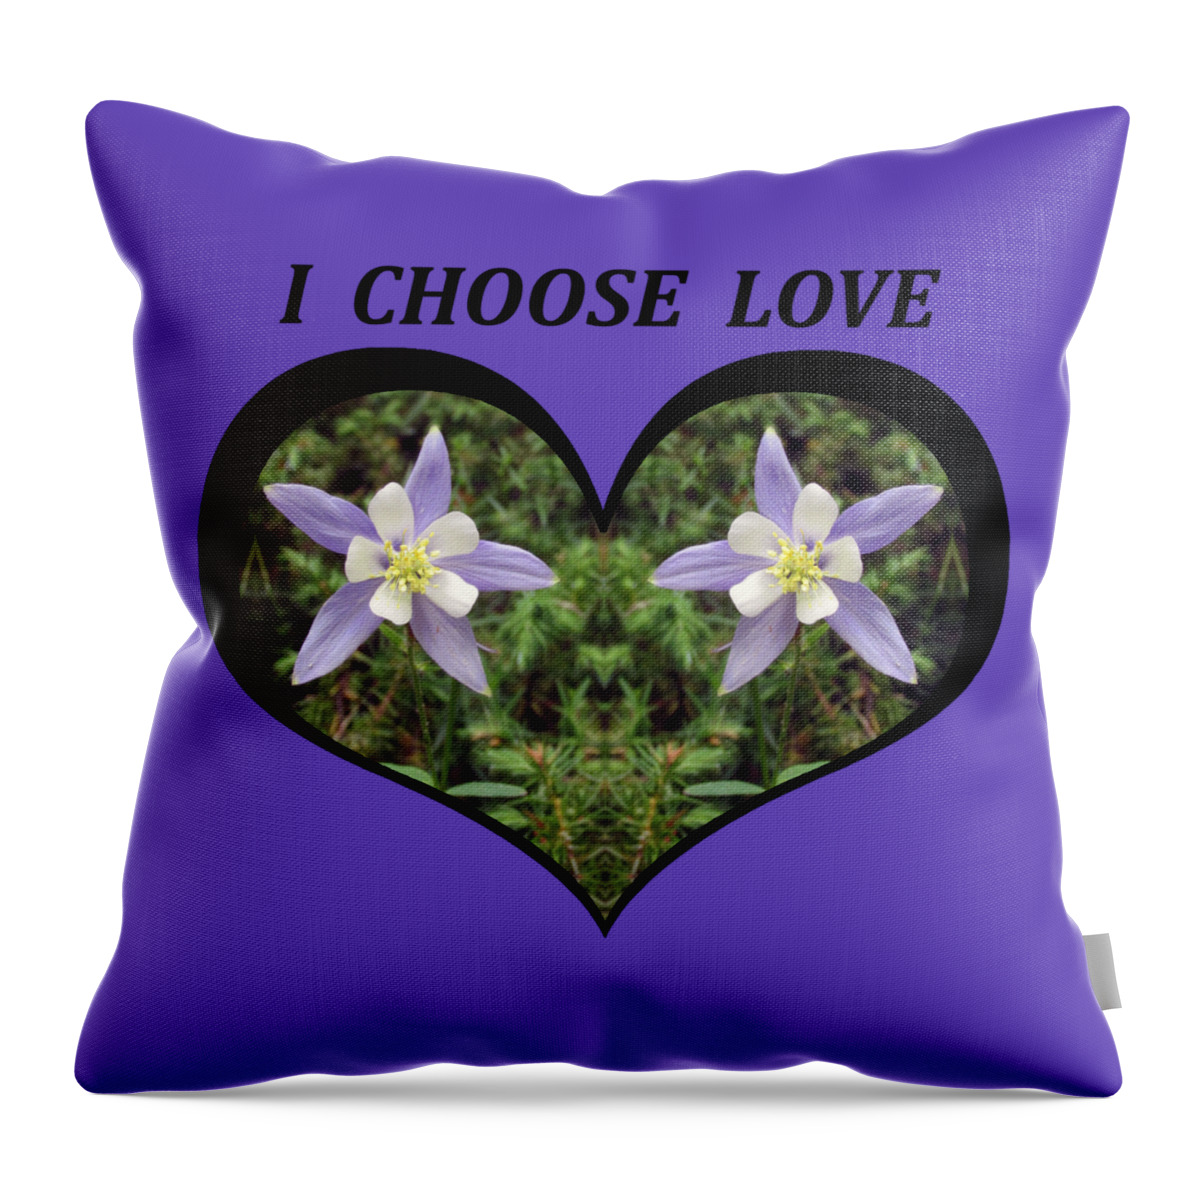 Love Throw Pillow featuring the digital art I Chose Love With A Heart Filled with Columbines by Julia L Wright